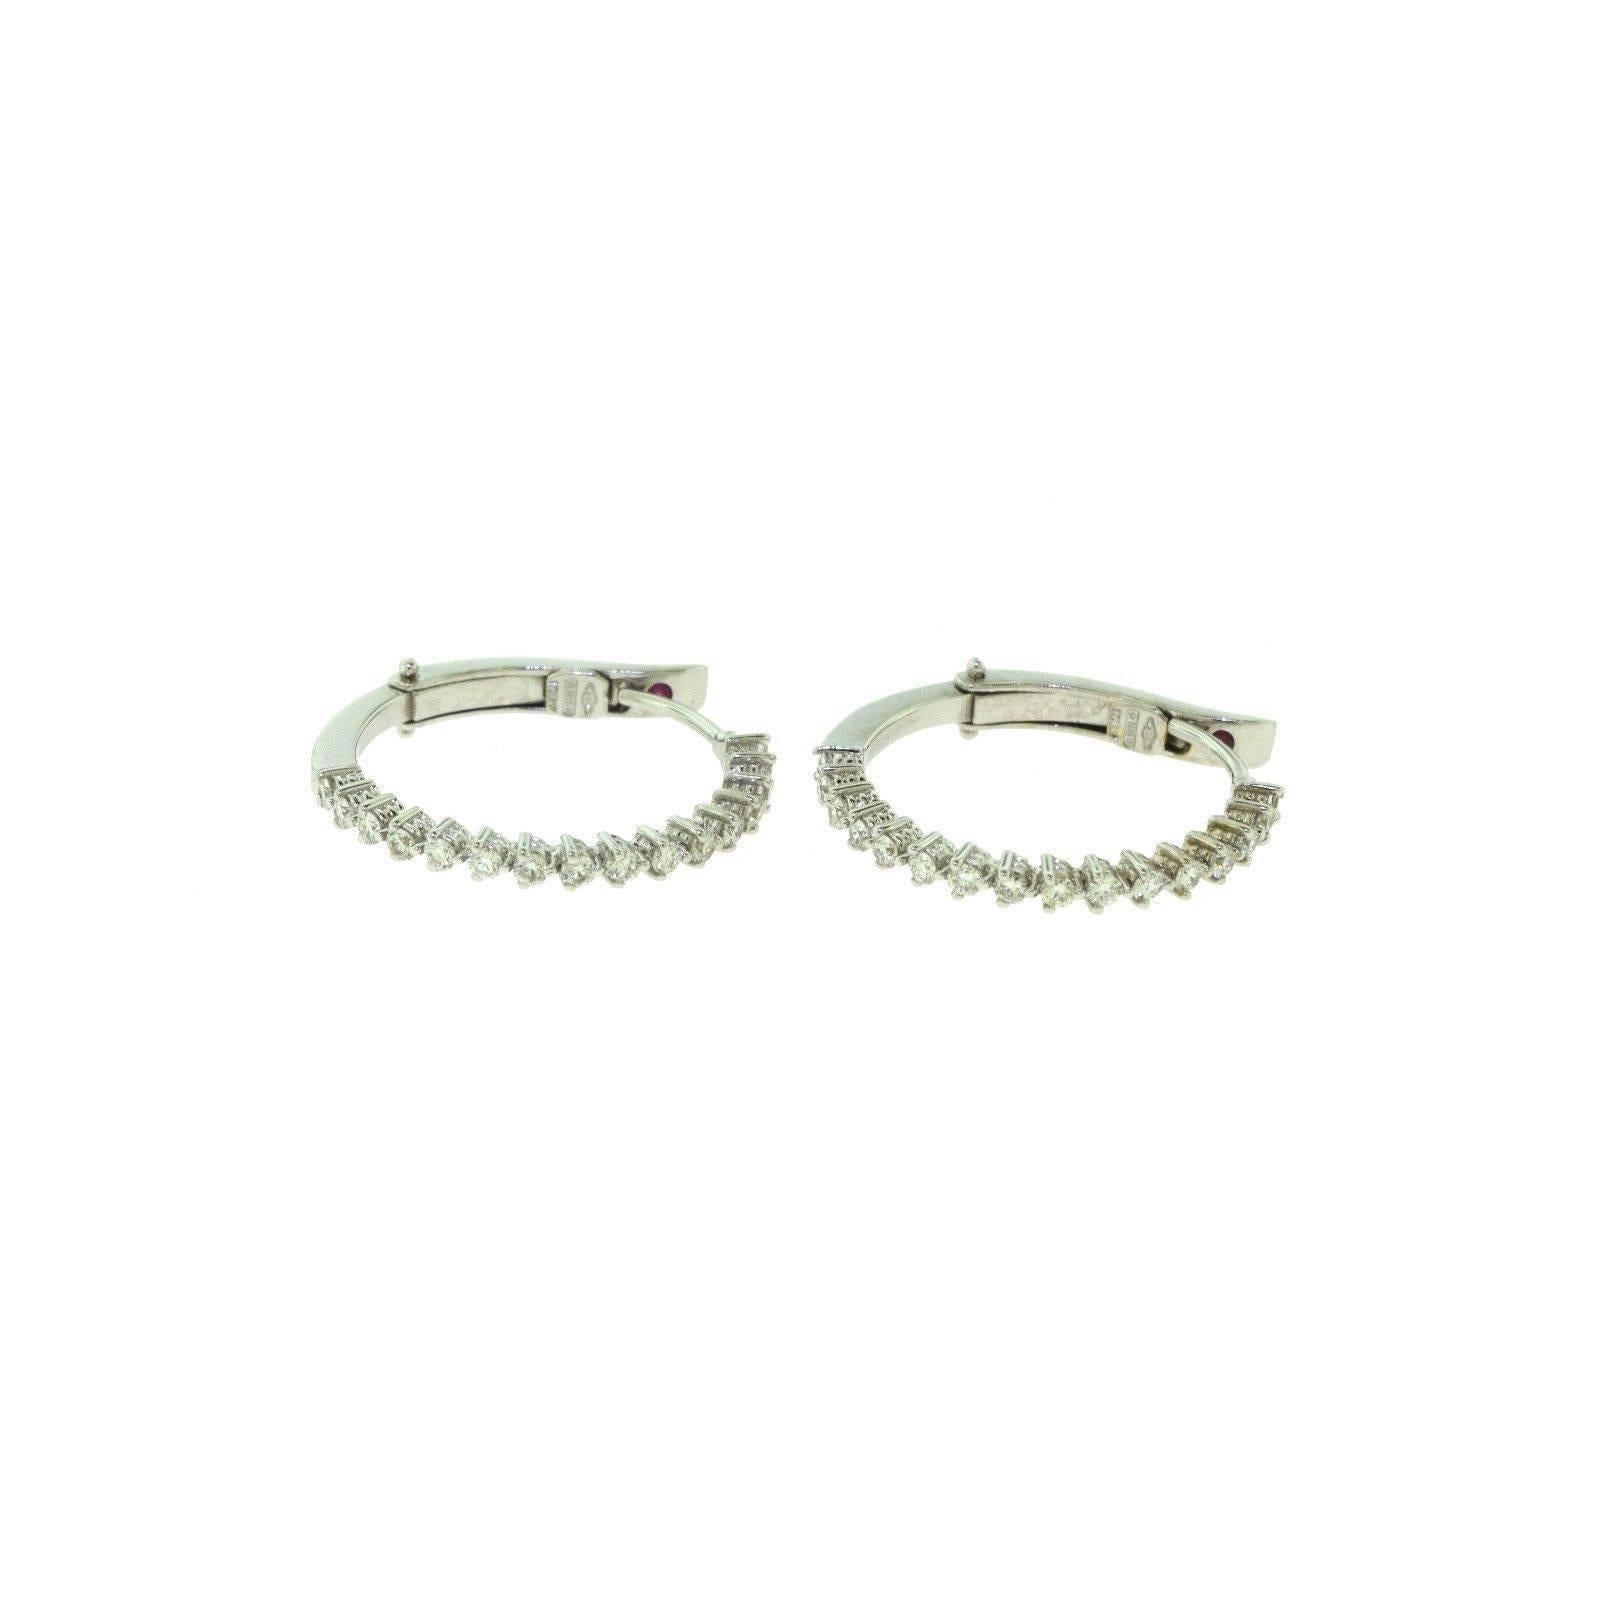 Roberto Coin Pave Diamond Hoop Earrings in 18 Karat White Gold, 1.16 Carat In Good Condition For Sale In Miami, FL